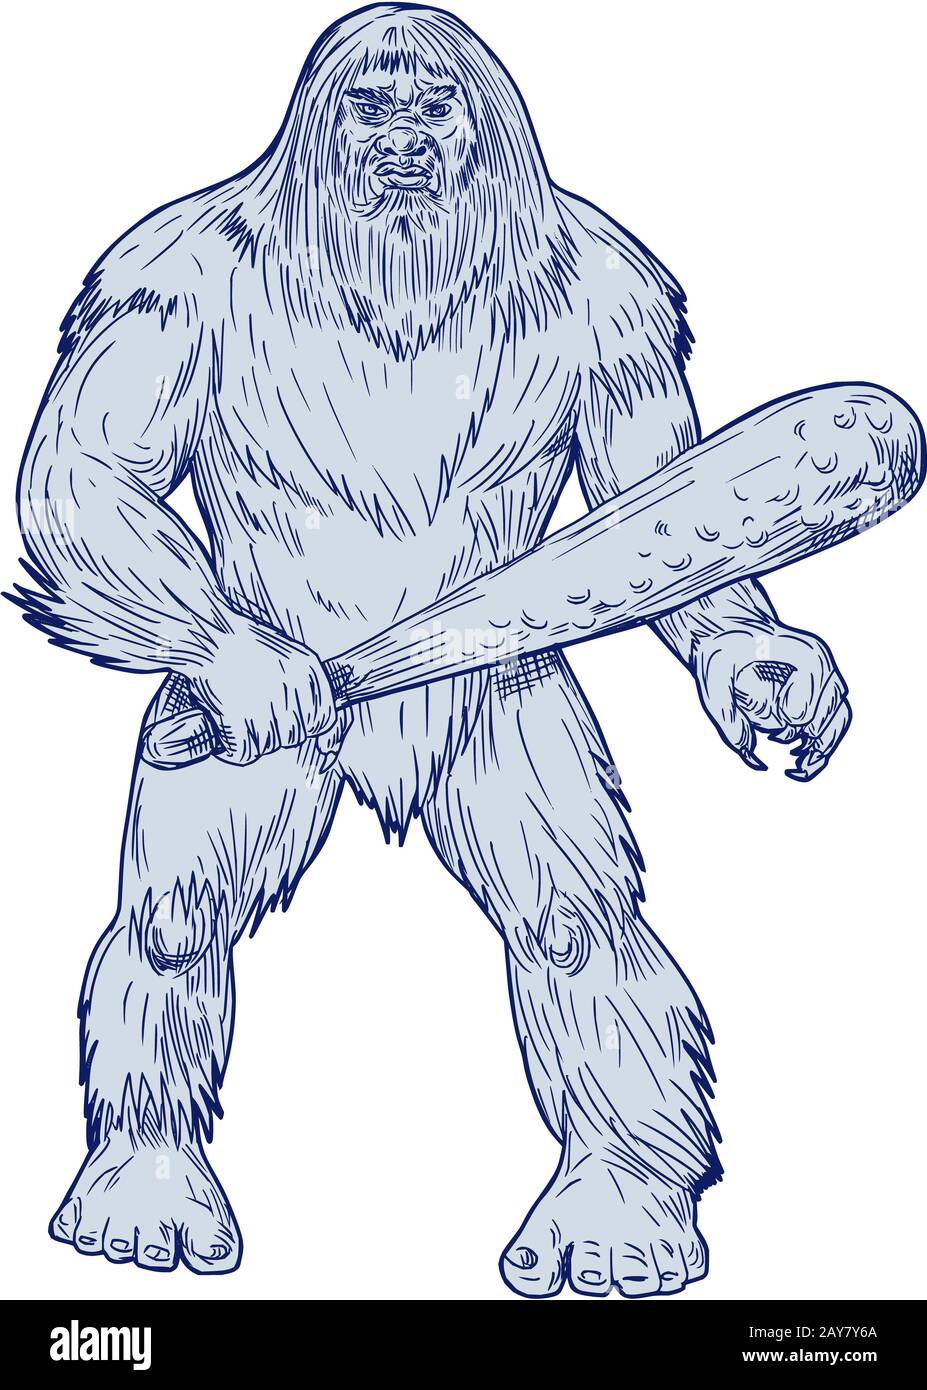 Famous Bigfoot and Yeti Encounters Coloring Book